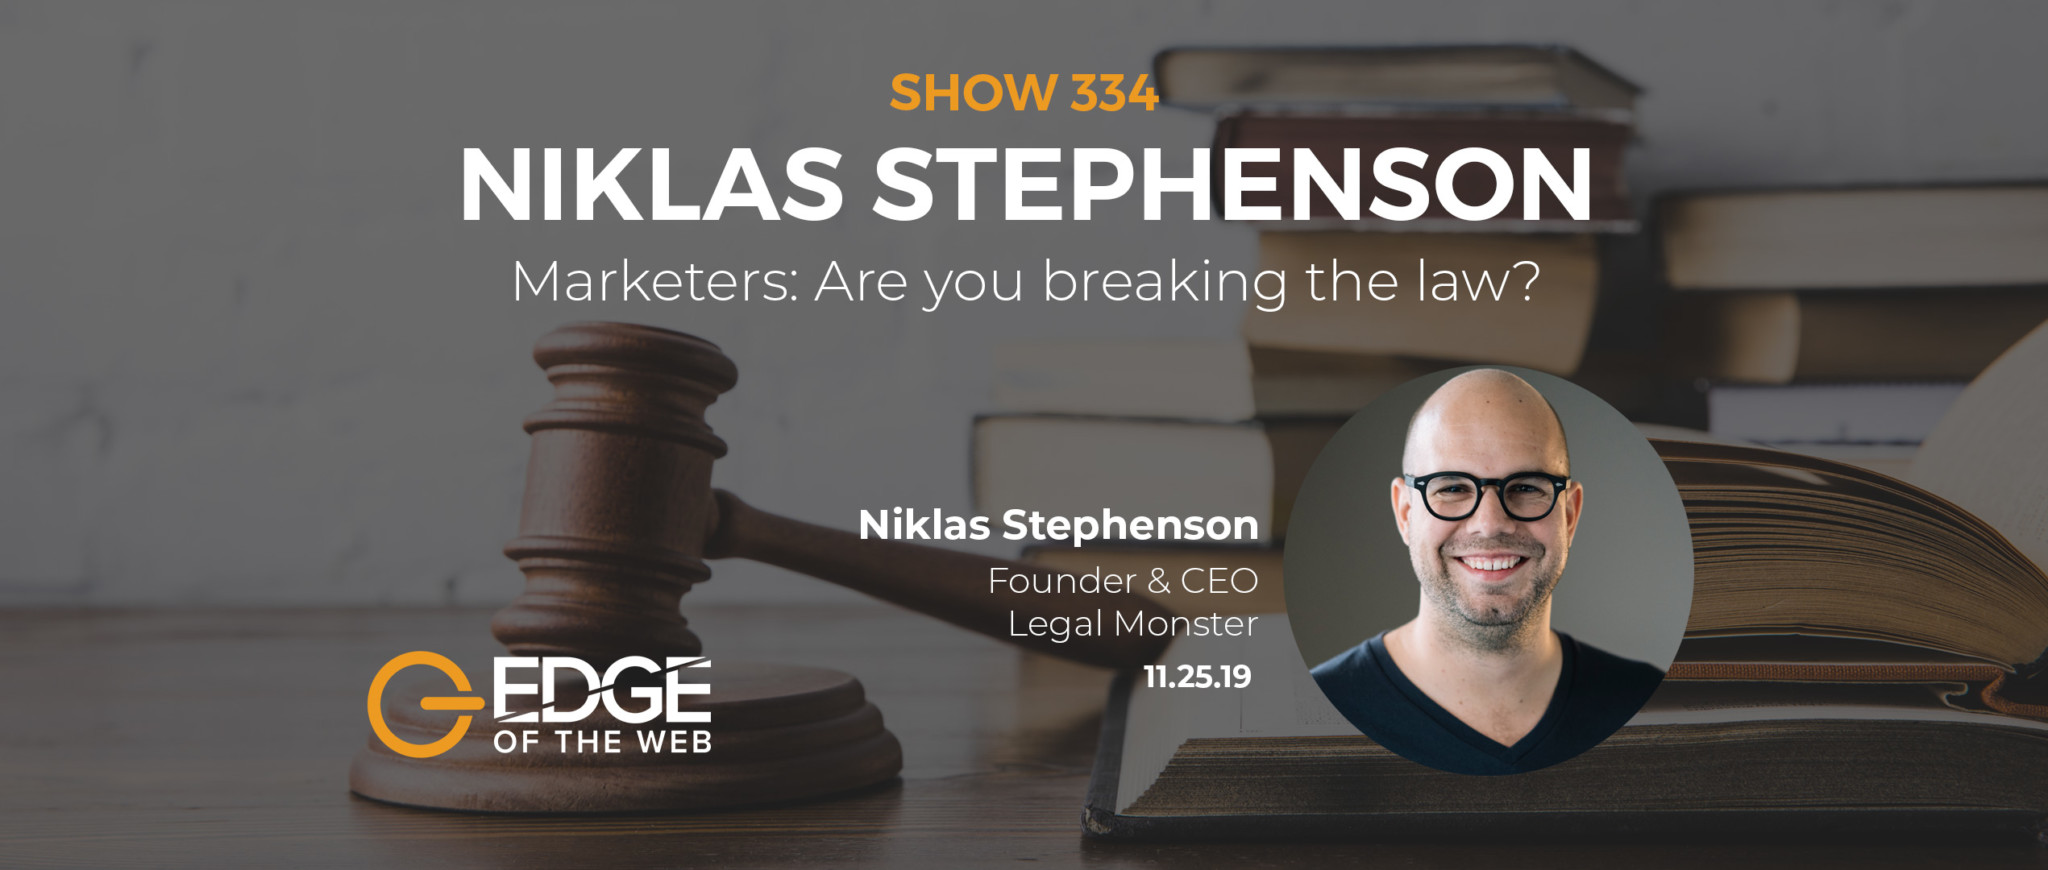 Show 334: Marketers: Are you breaking the law?, featuring Niklas Stephenson